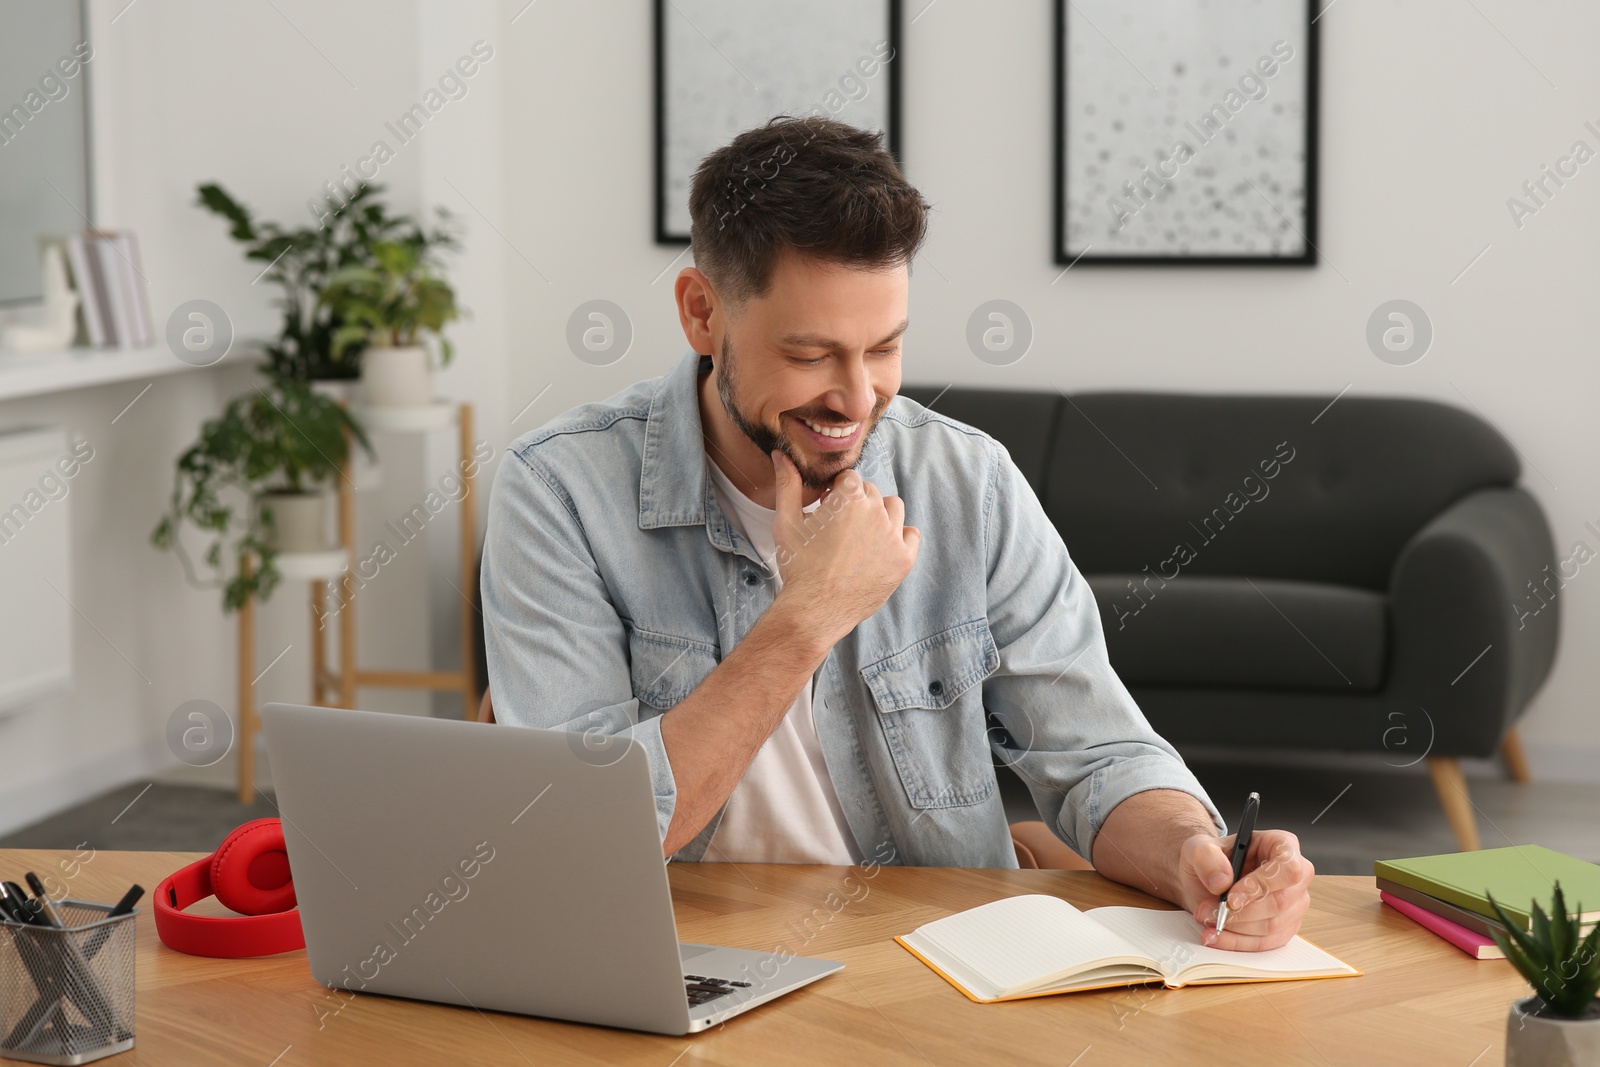 Photo of Online translation course. Man writing near laptop at home